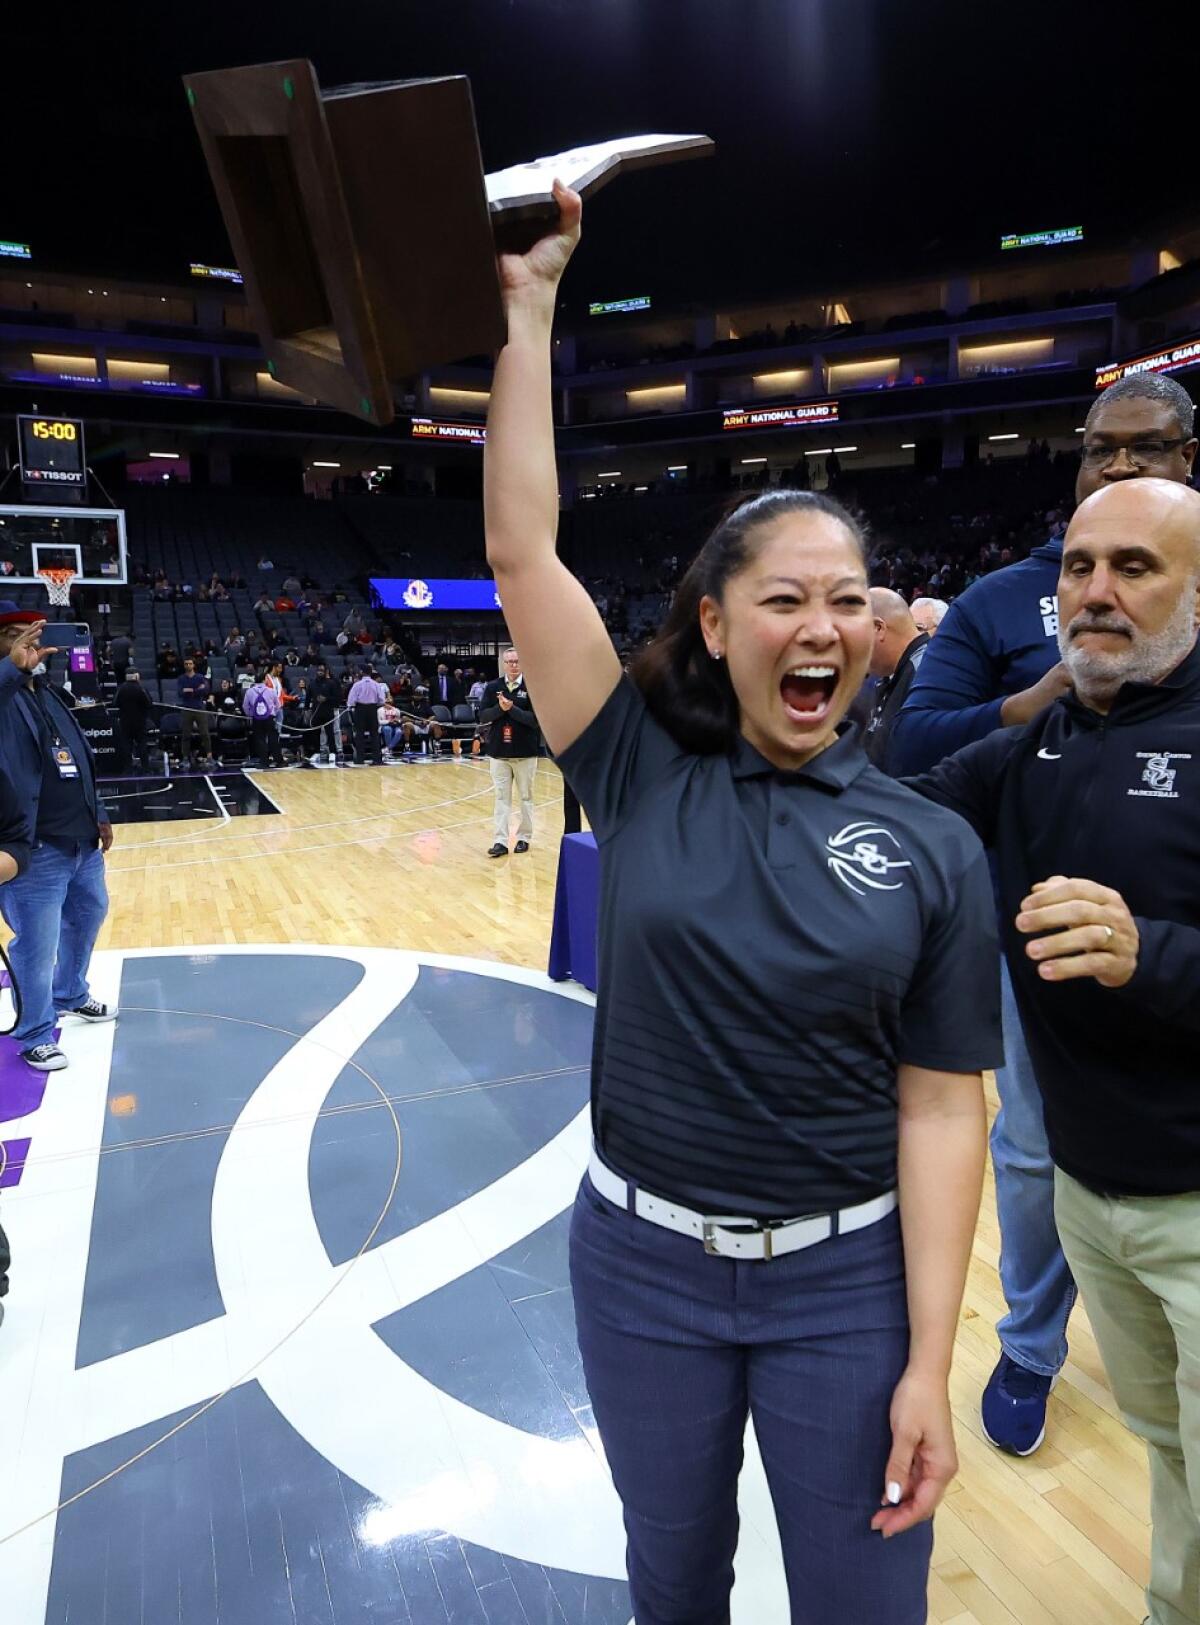 Coach Alicia Komaki celebrates after Sierra Canyon wins state Open Division girls' basketball title.